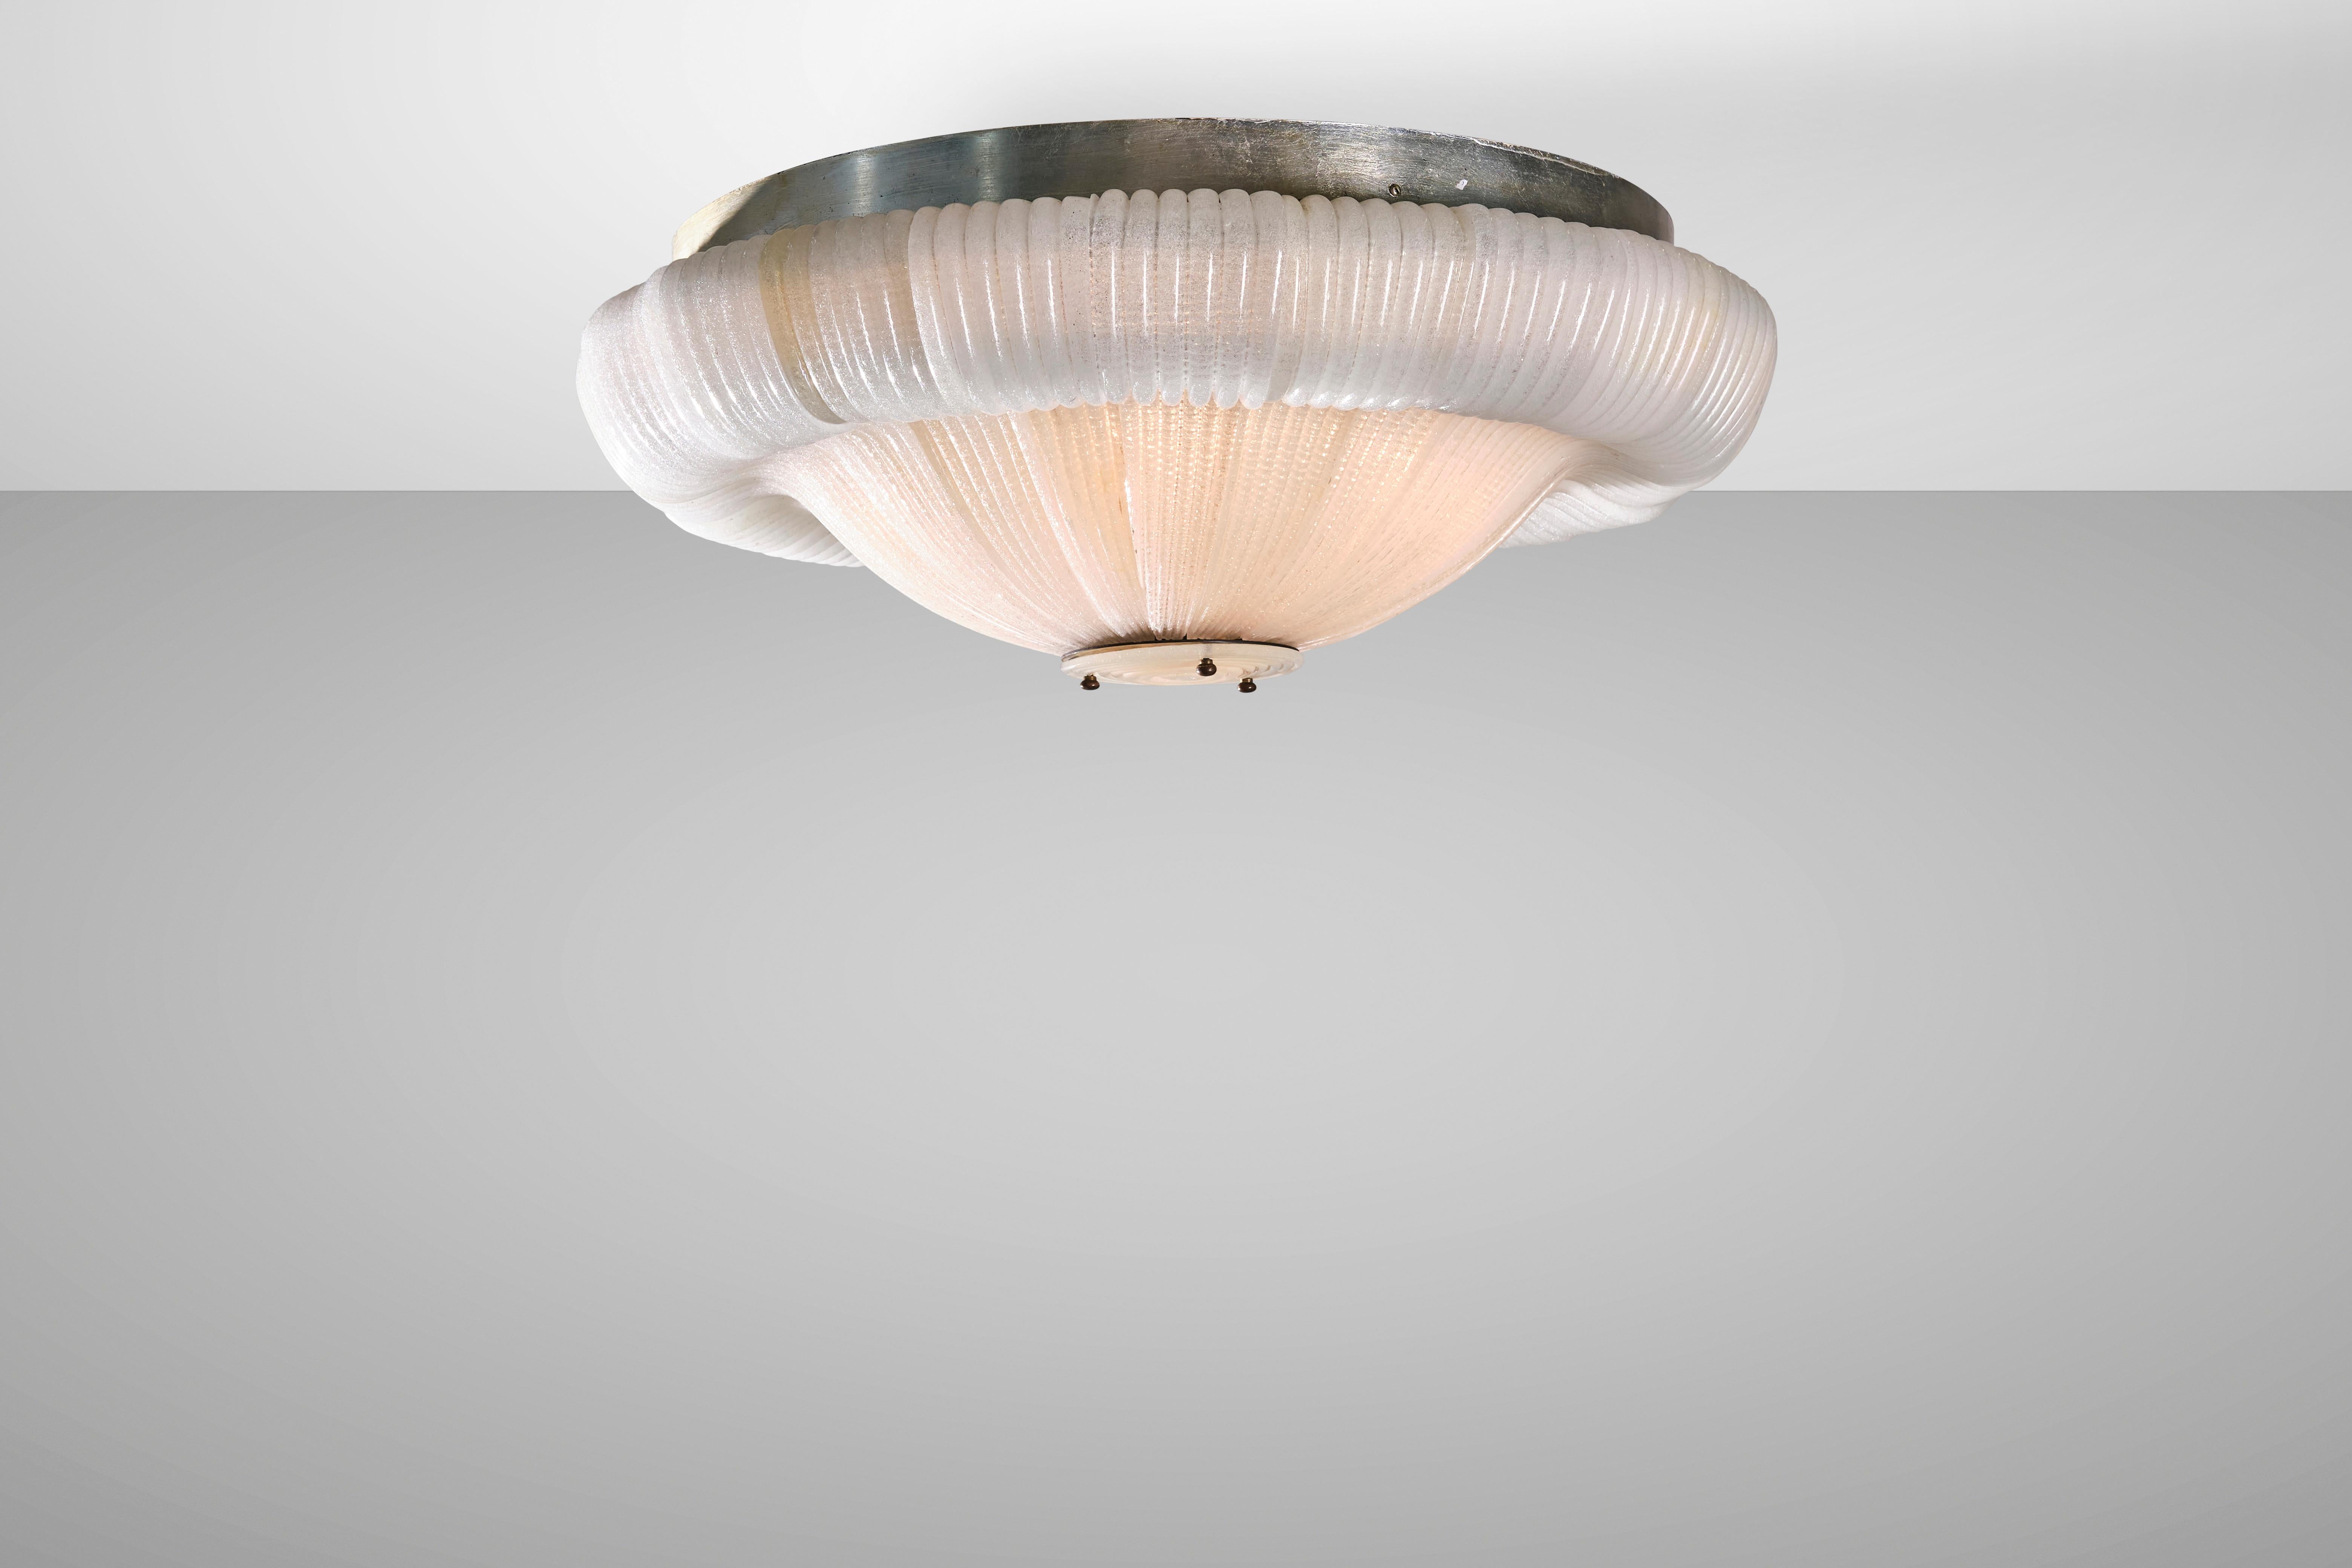 Elegant and timeless, Murano glass ceiling lamps are varied and diverse but each carries with it the aura of the wisdom of the lagoon's master glassmakers. This chandelier from the 1940s is made of metal and brass with Cordonato glass elements, a